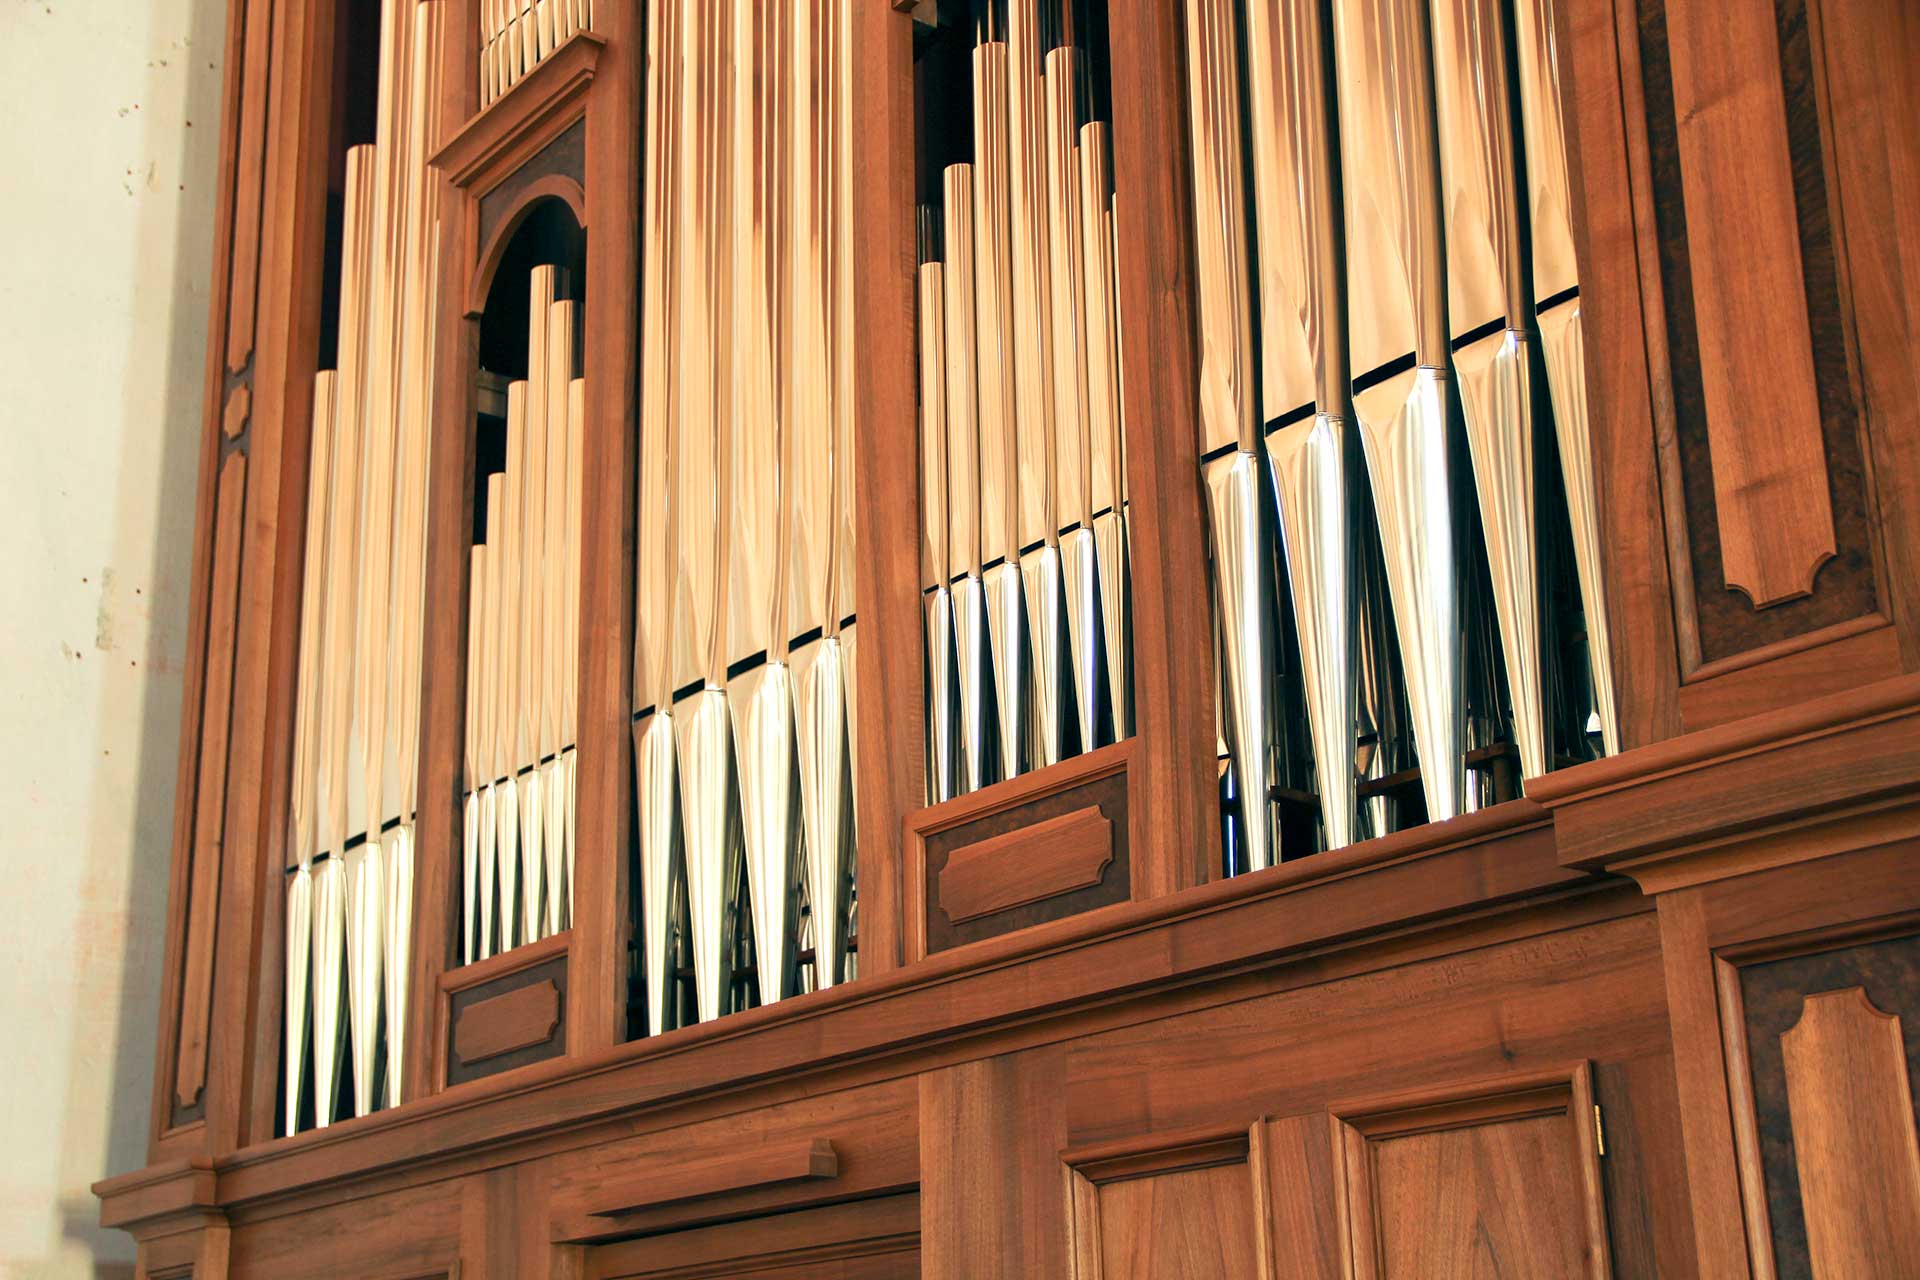 Organs Please download the new for windows